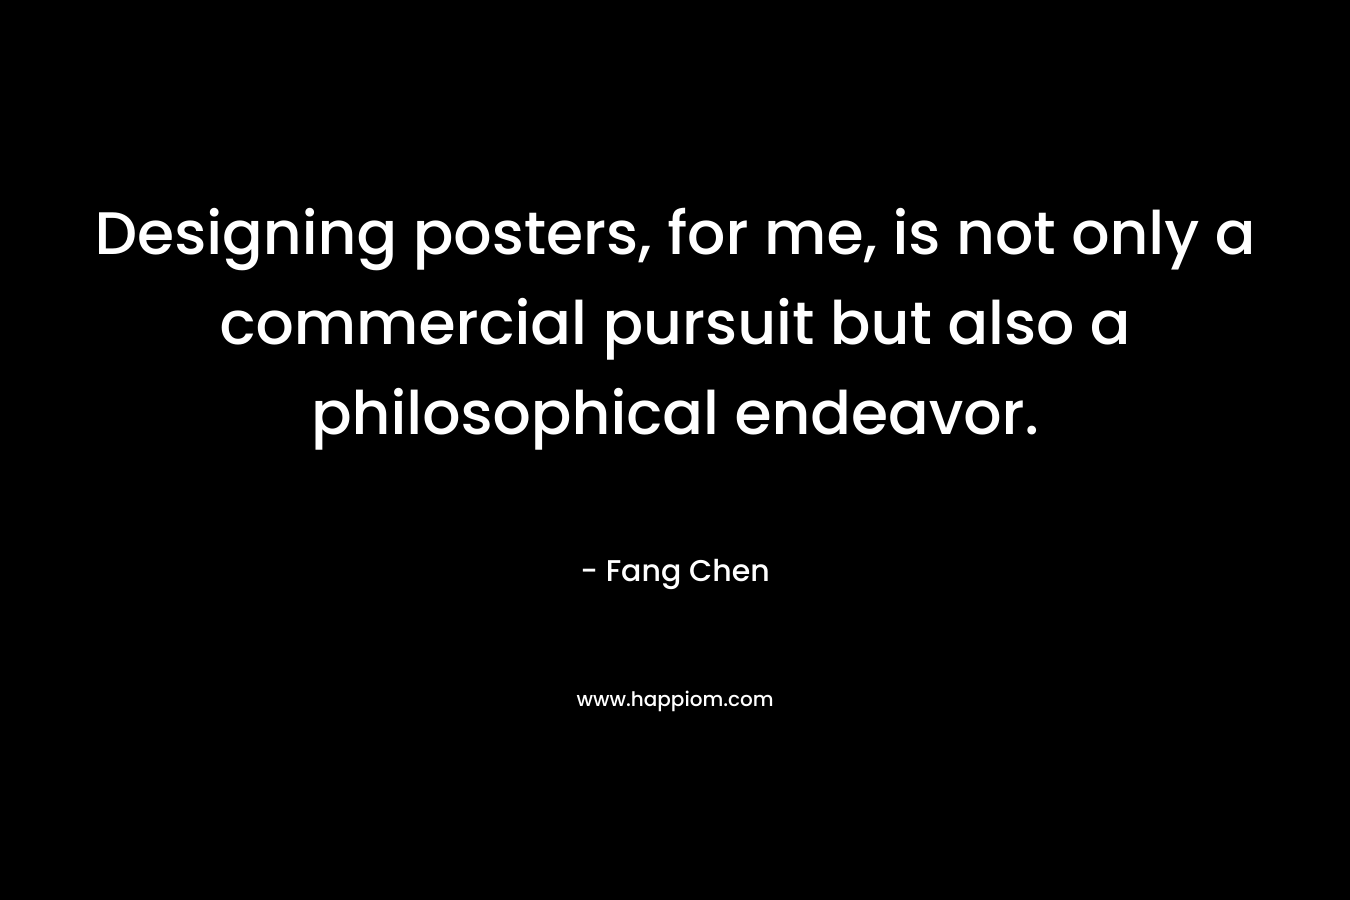 Designing posters, for me, is not only a commercial pursuit but also a philosophical endeavor. – Fang Chen